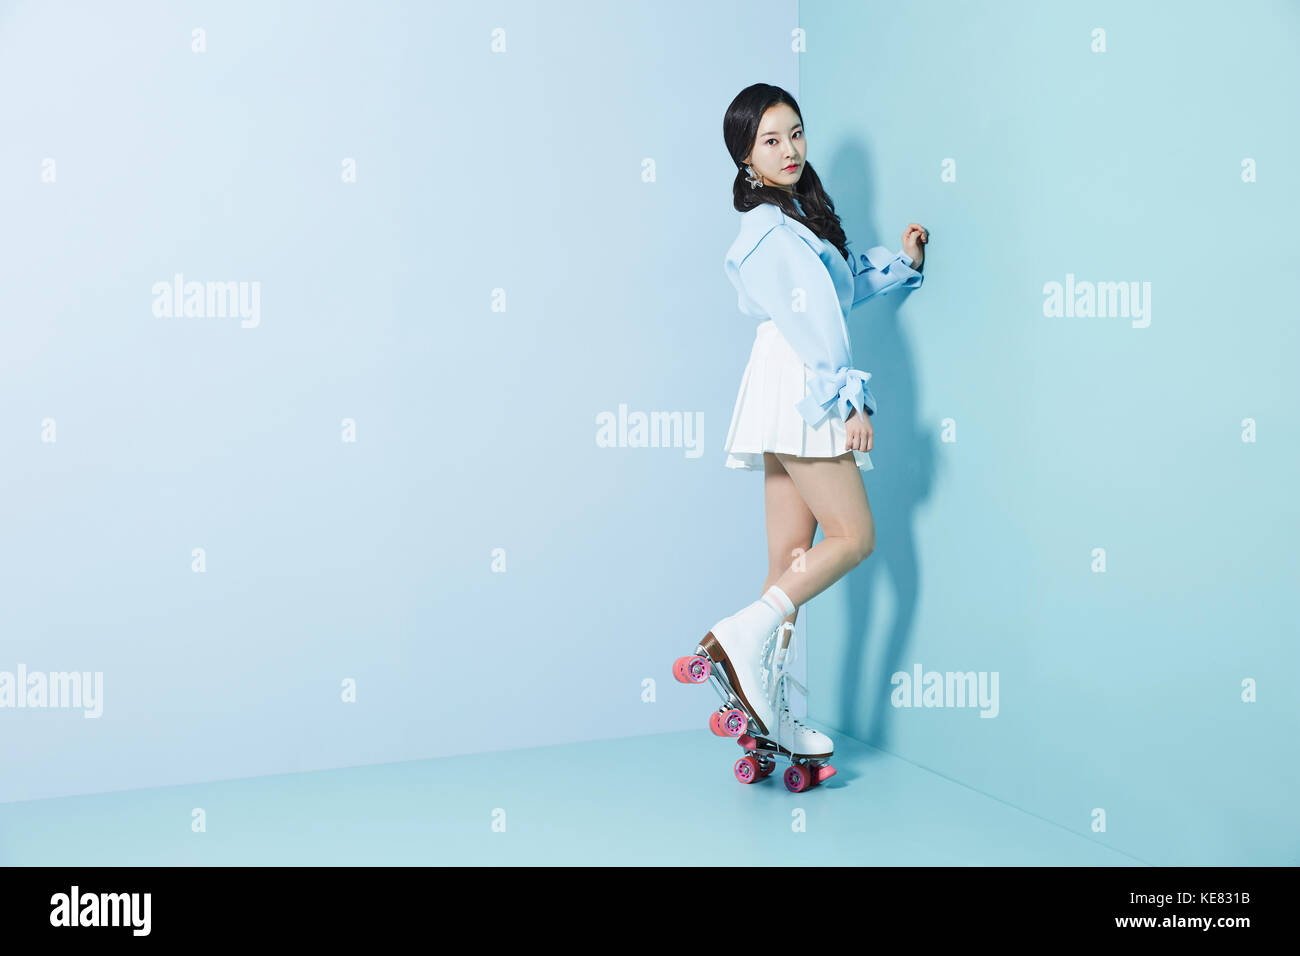 Young woman posing in roller skates standing on one foot Stock Photo